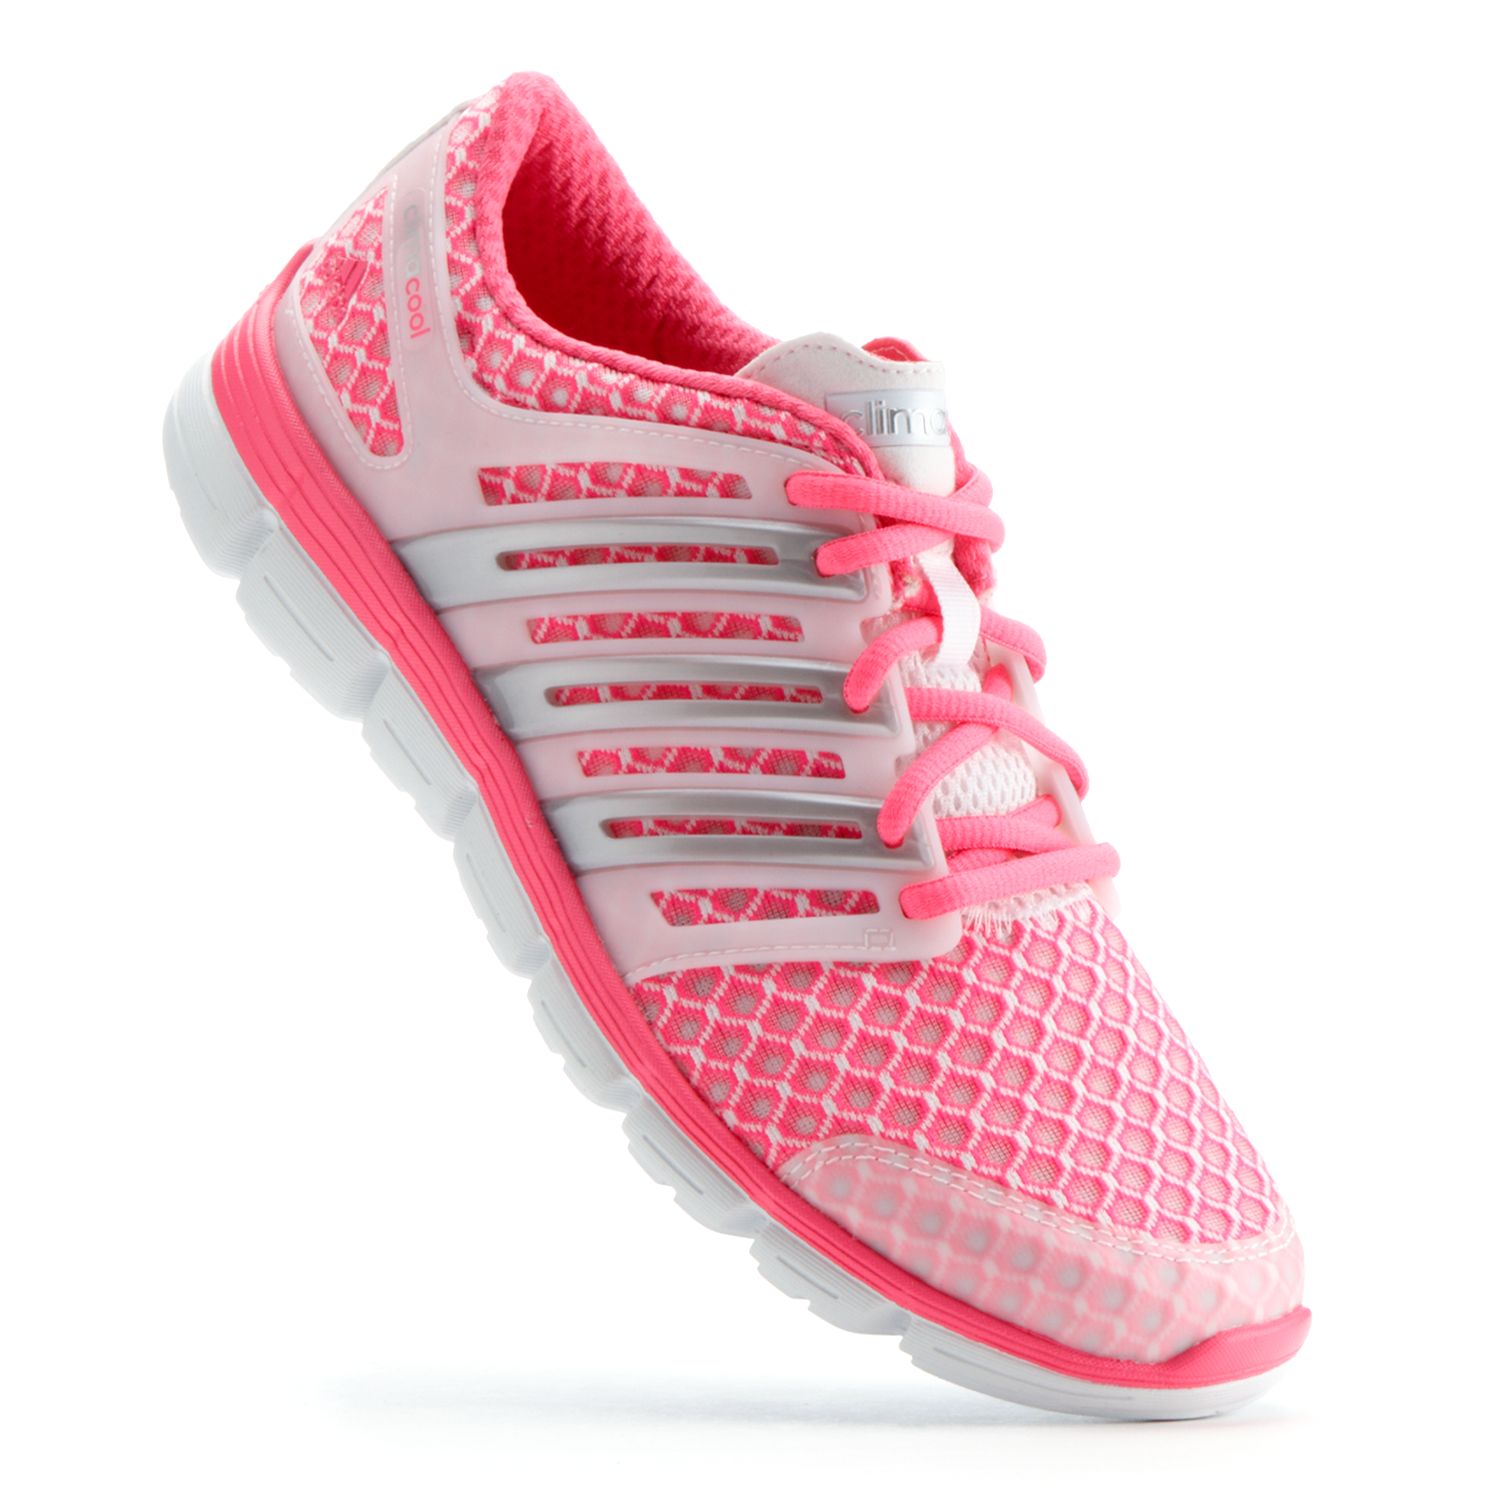 adidas climacool ladies running shoes